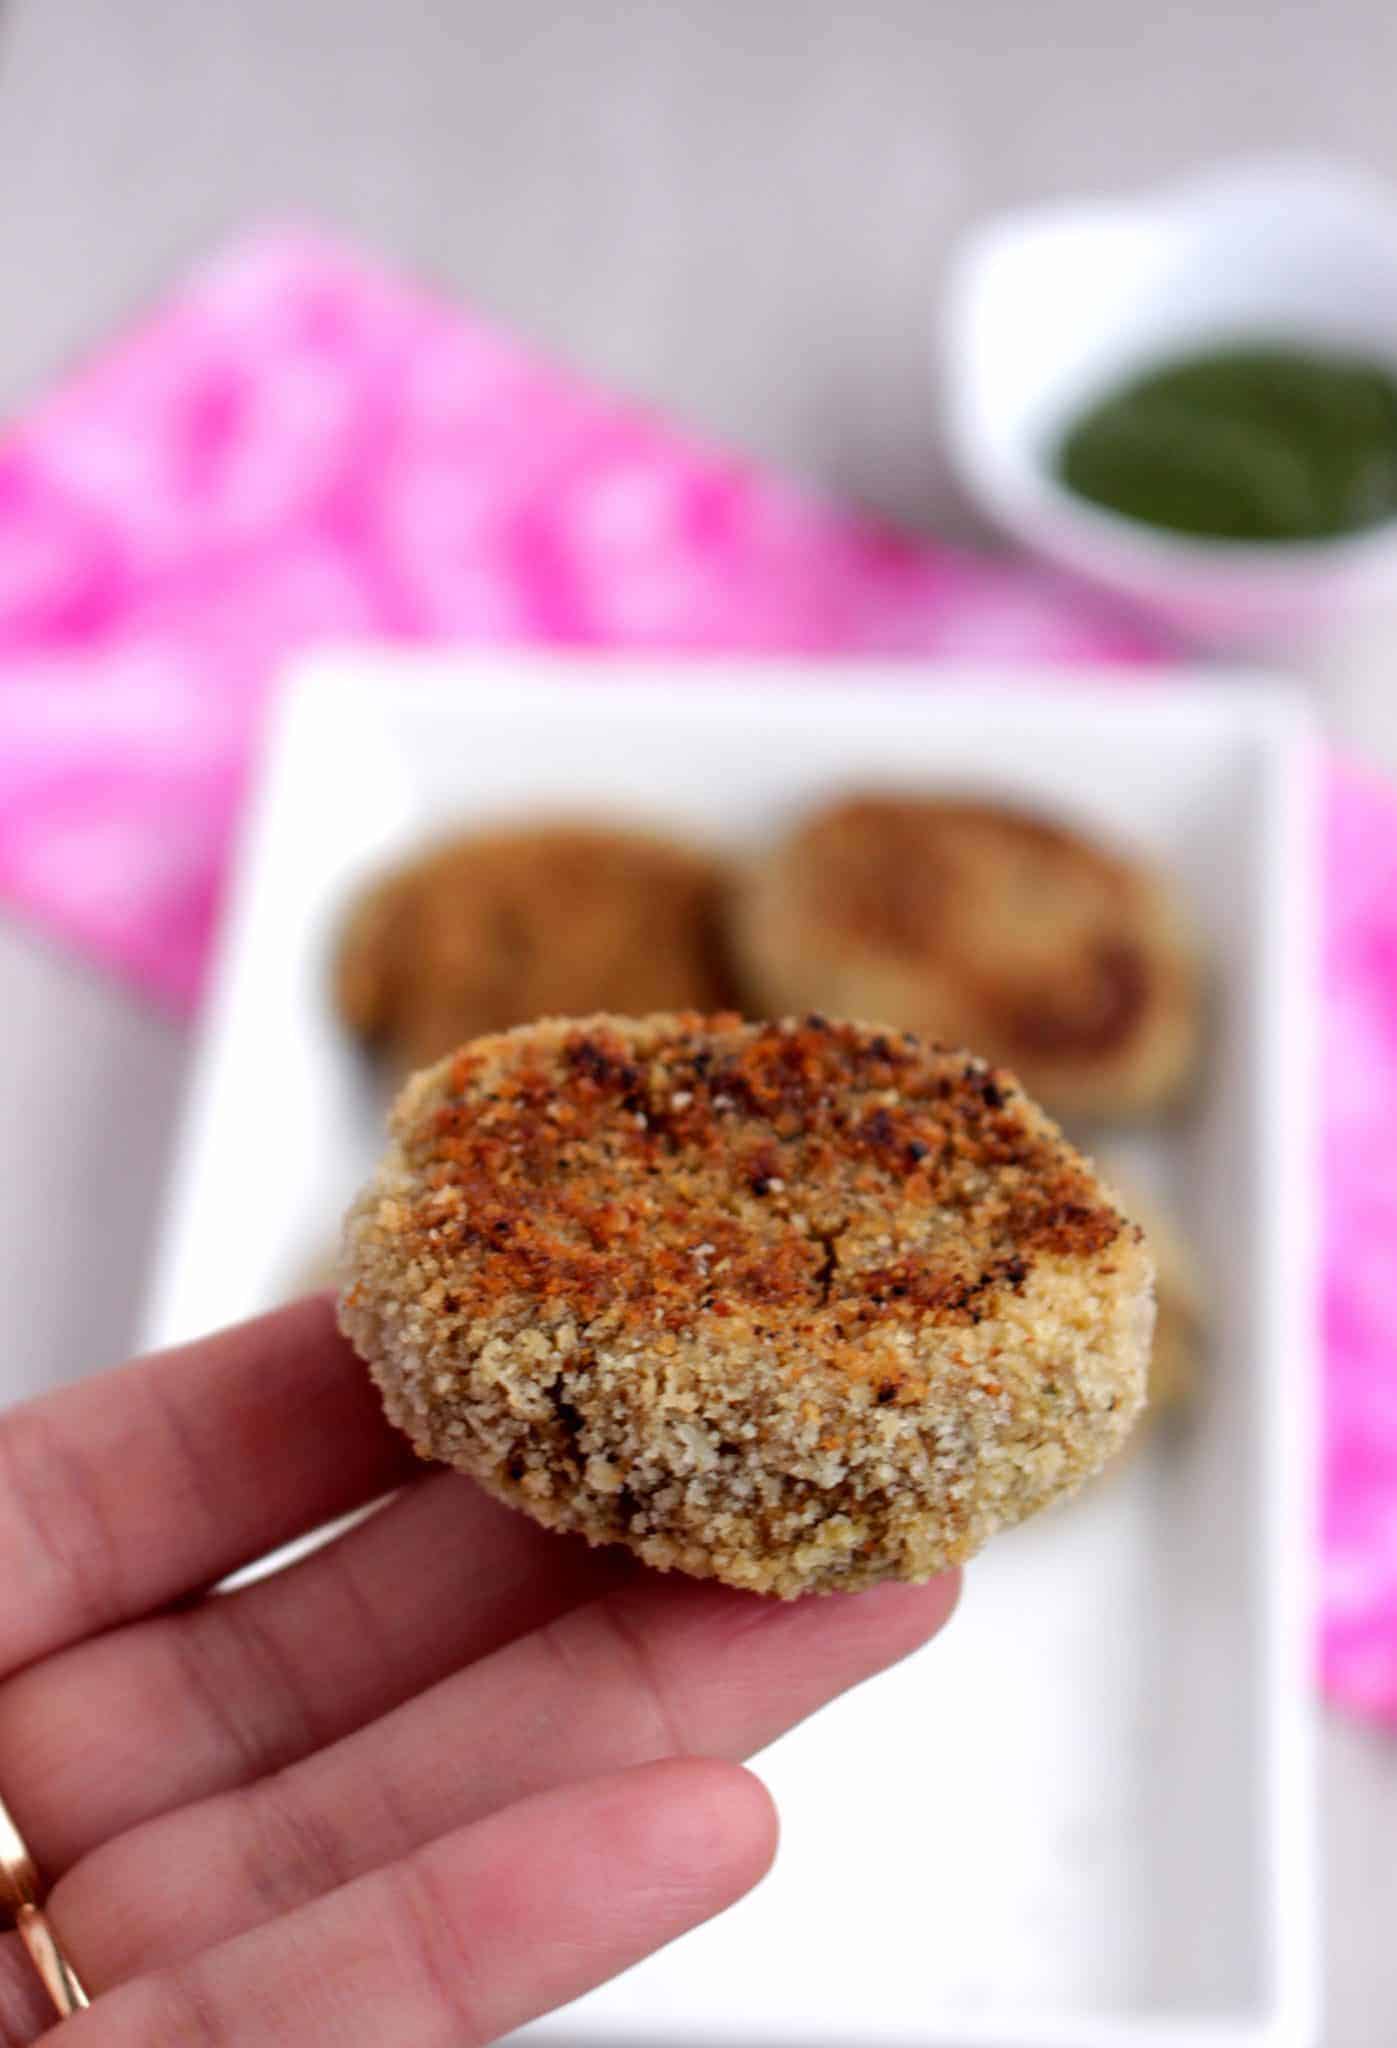 Baked Quinoa Vegetable Cutlet in hand